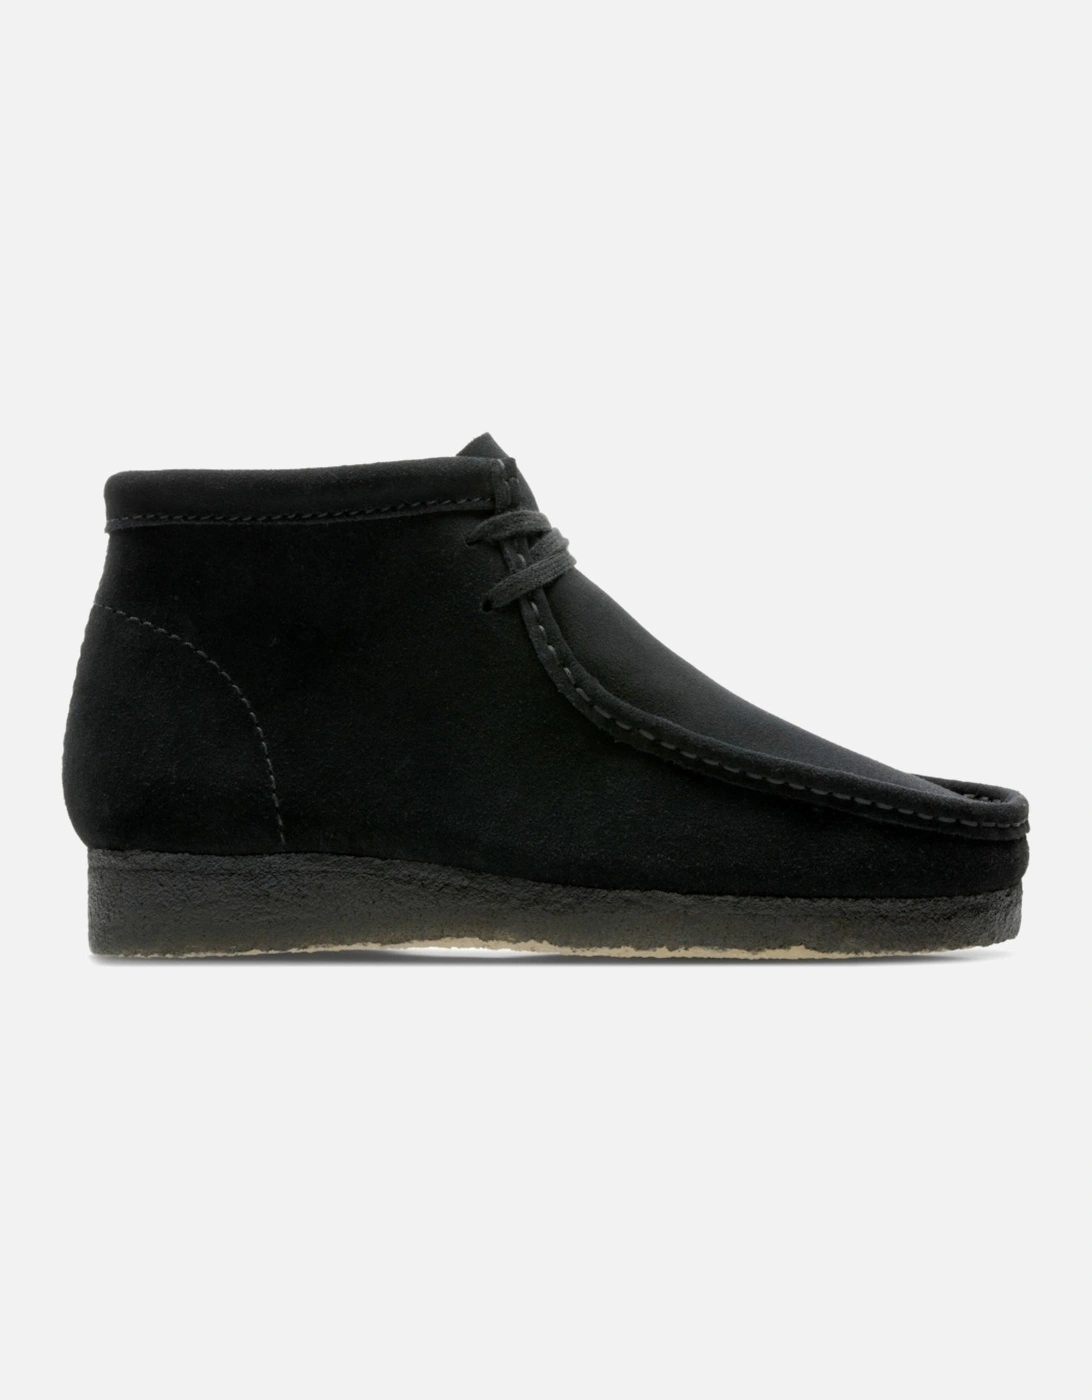 Wallabee Boot Black Suede, 8 of 7